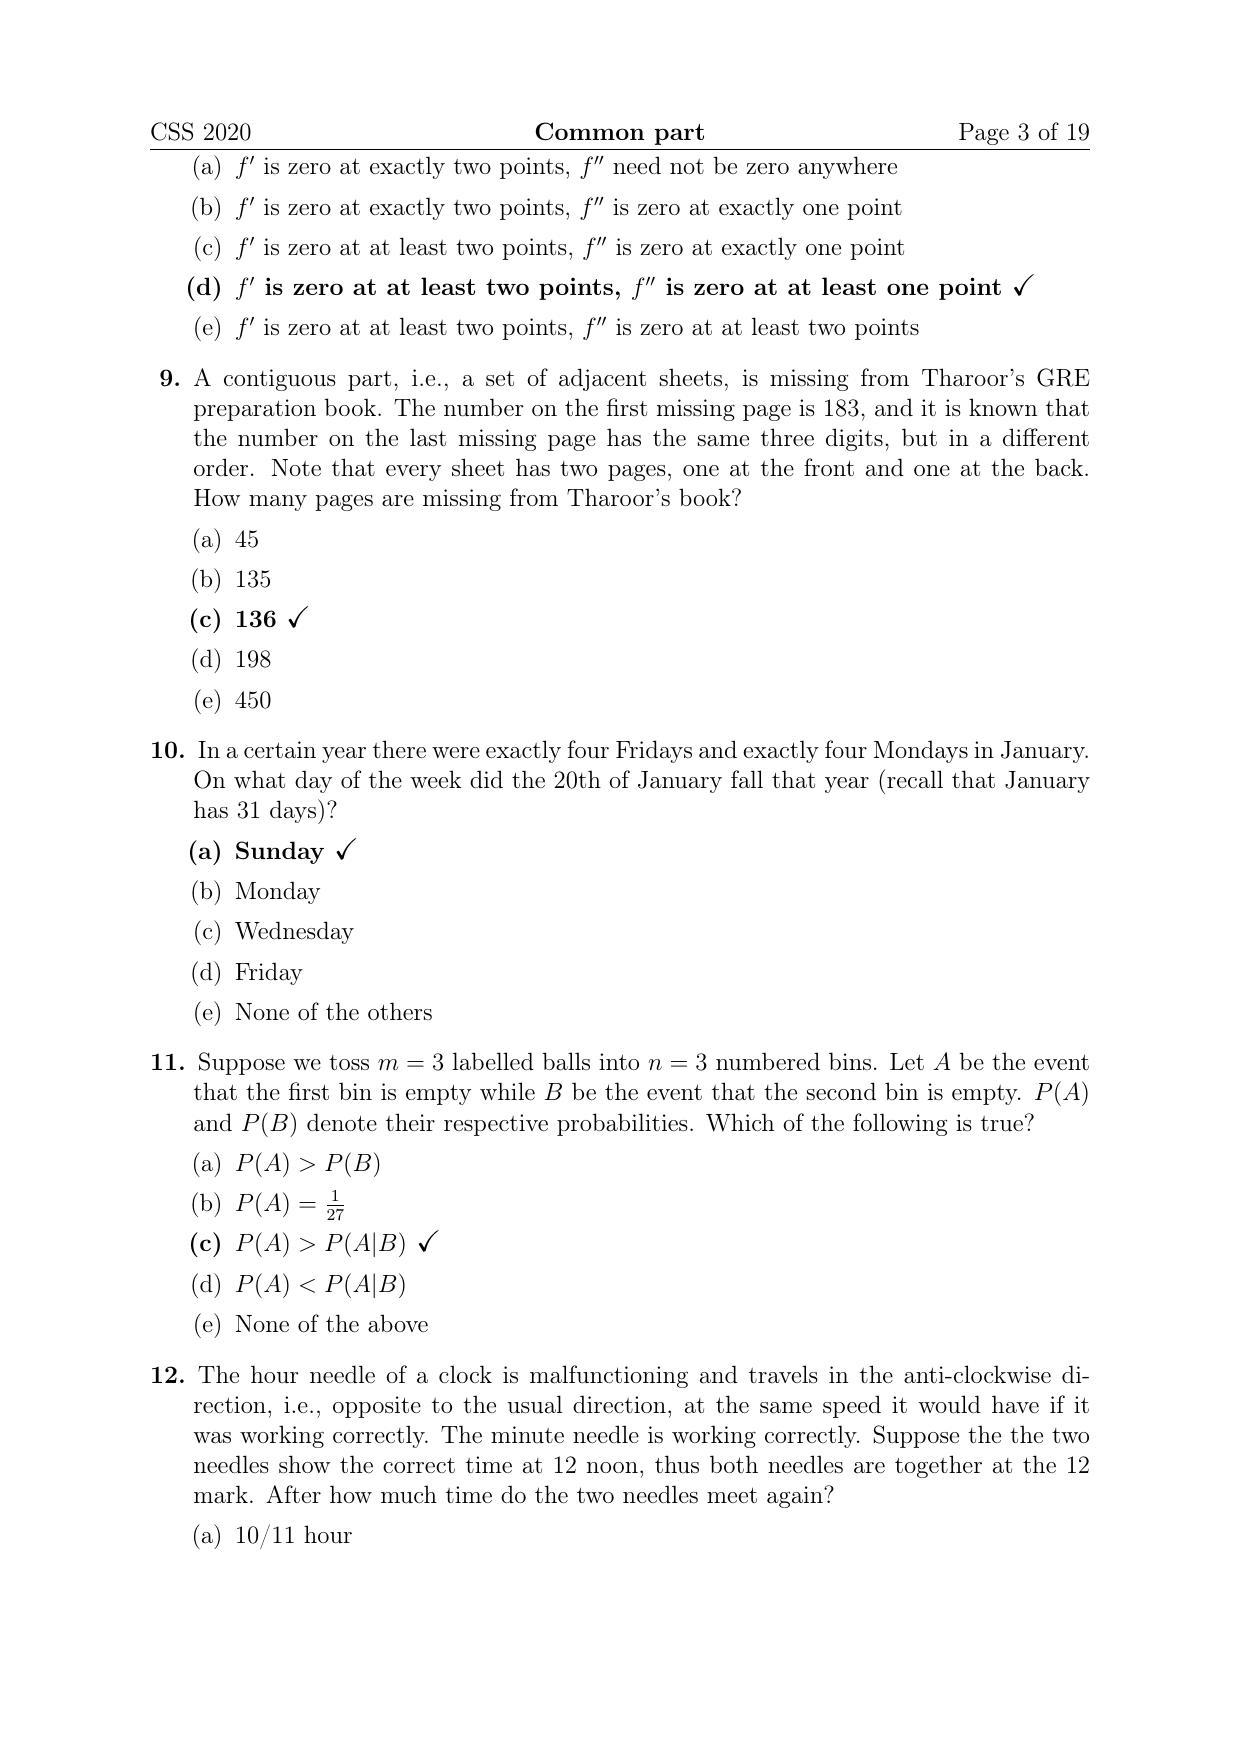 TIFR GS 2020 Computer & Systems Sciences Question Paper - Page 3